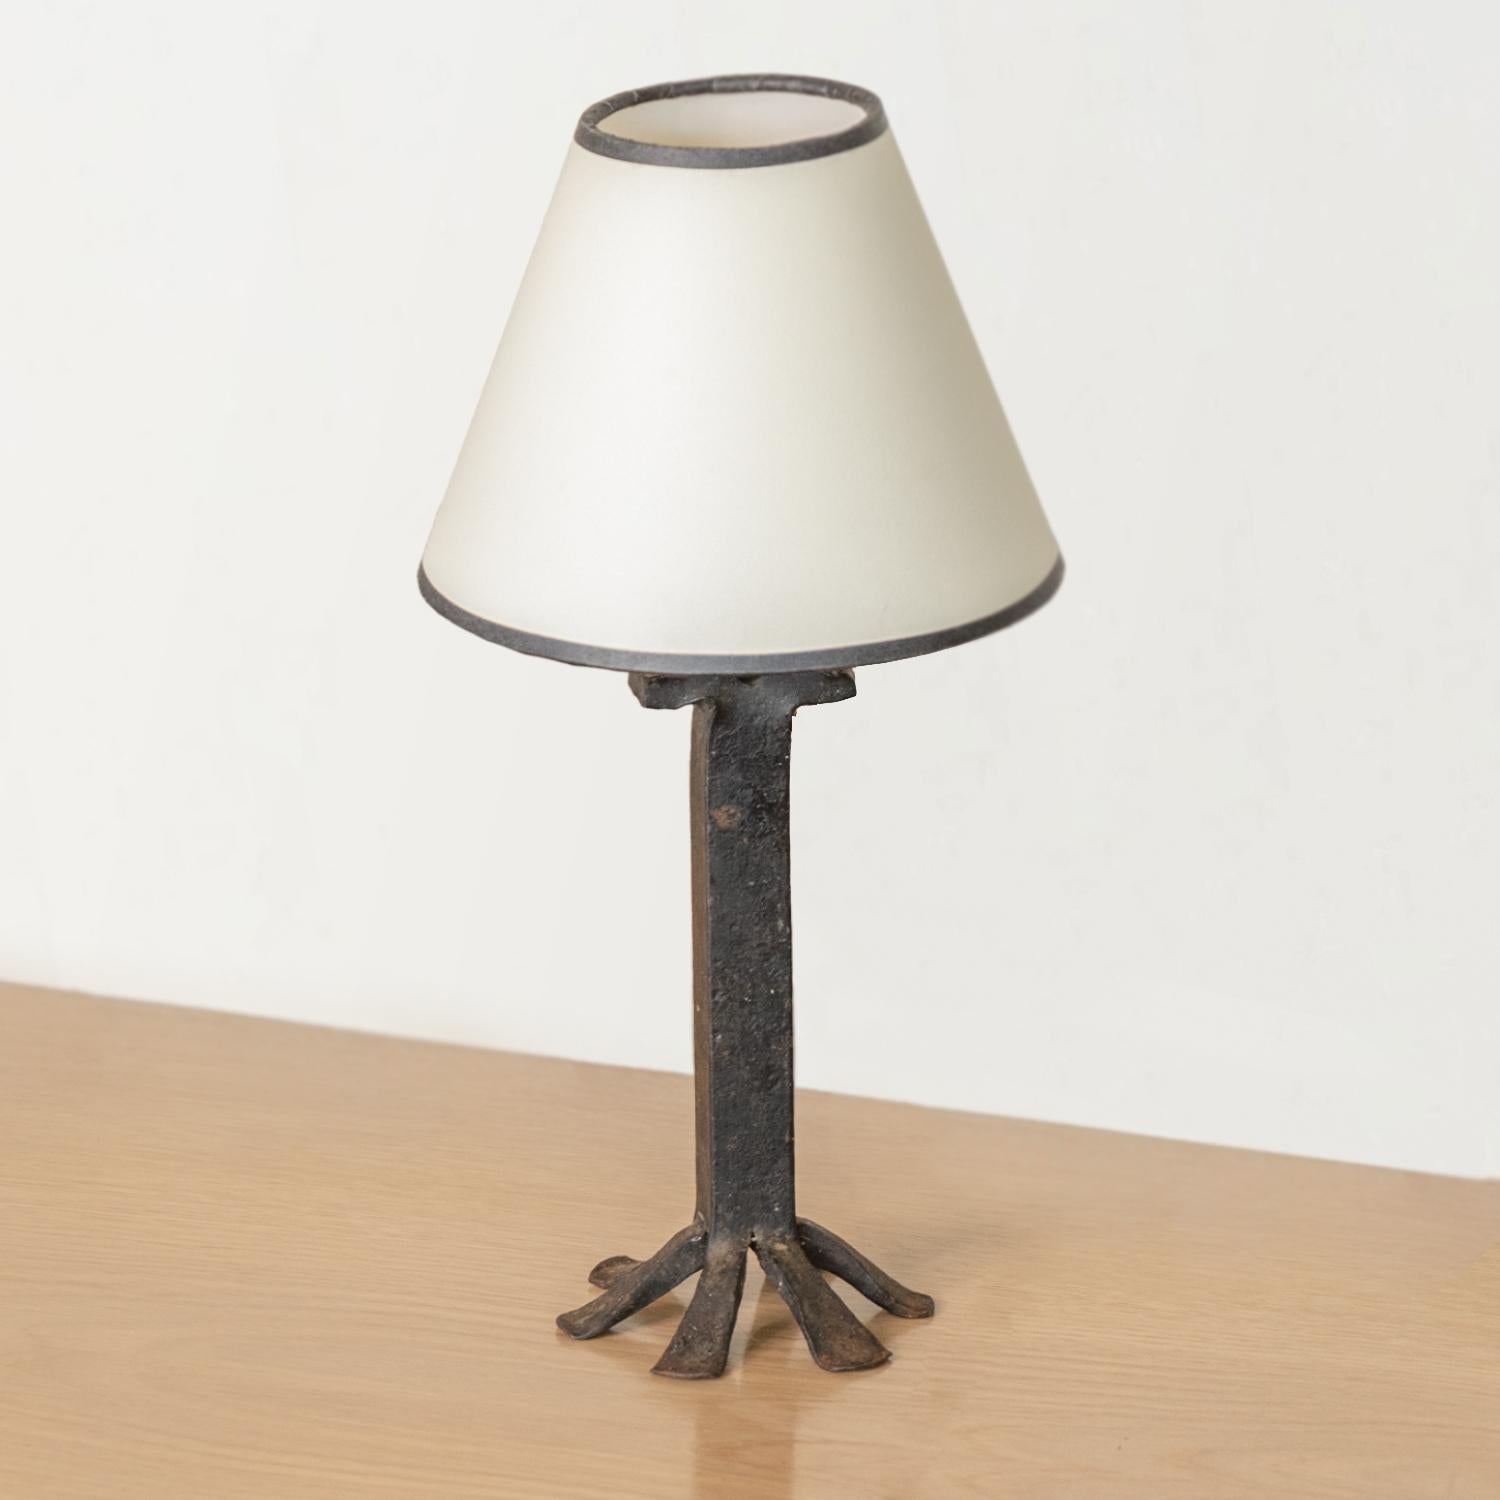 Unique French black iron table lamp with rectangular iron stem and six foot base. Newly re-wired and new paper shade with black trim.